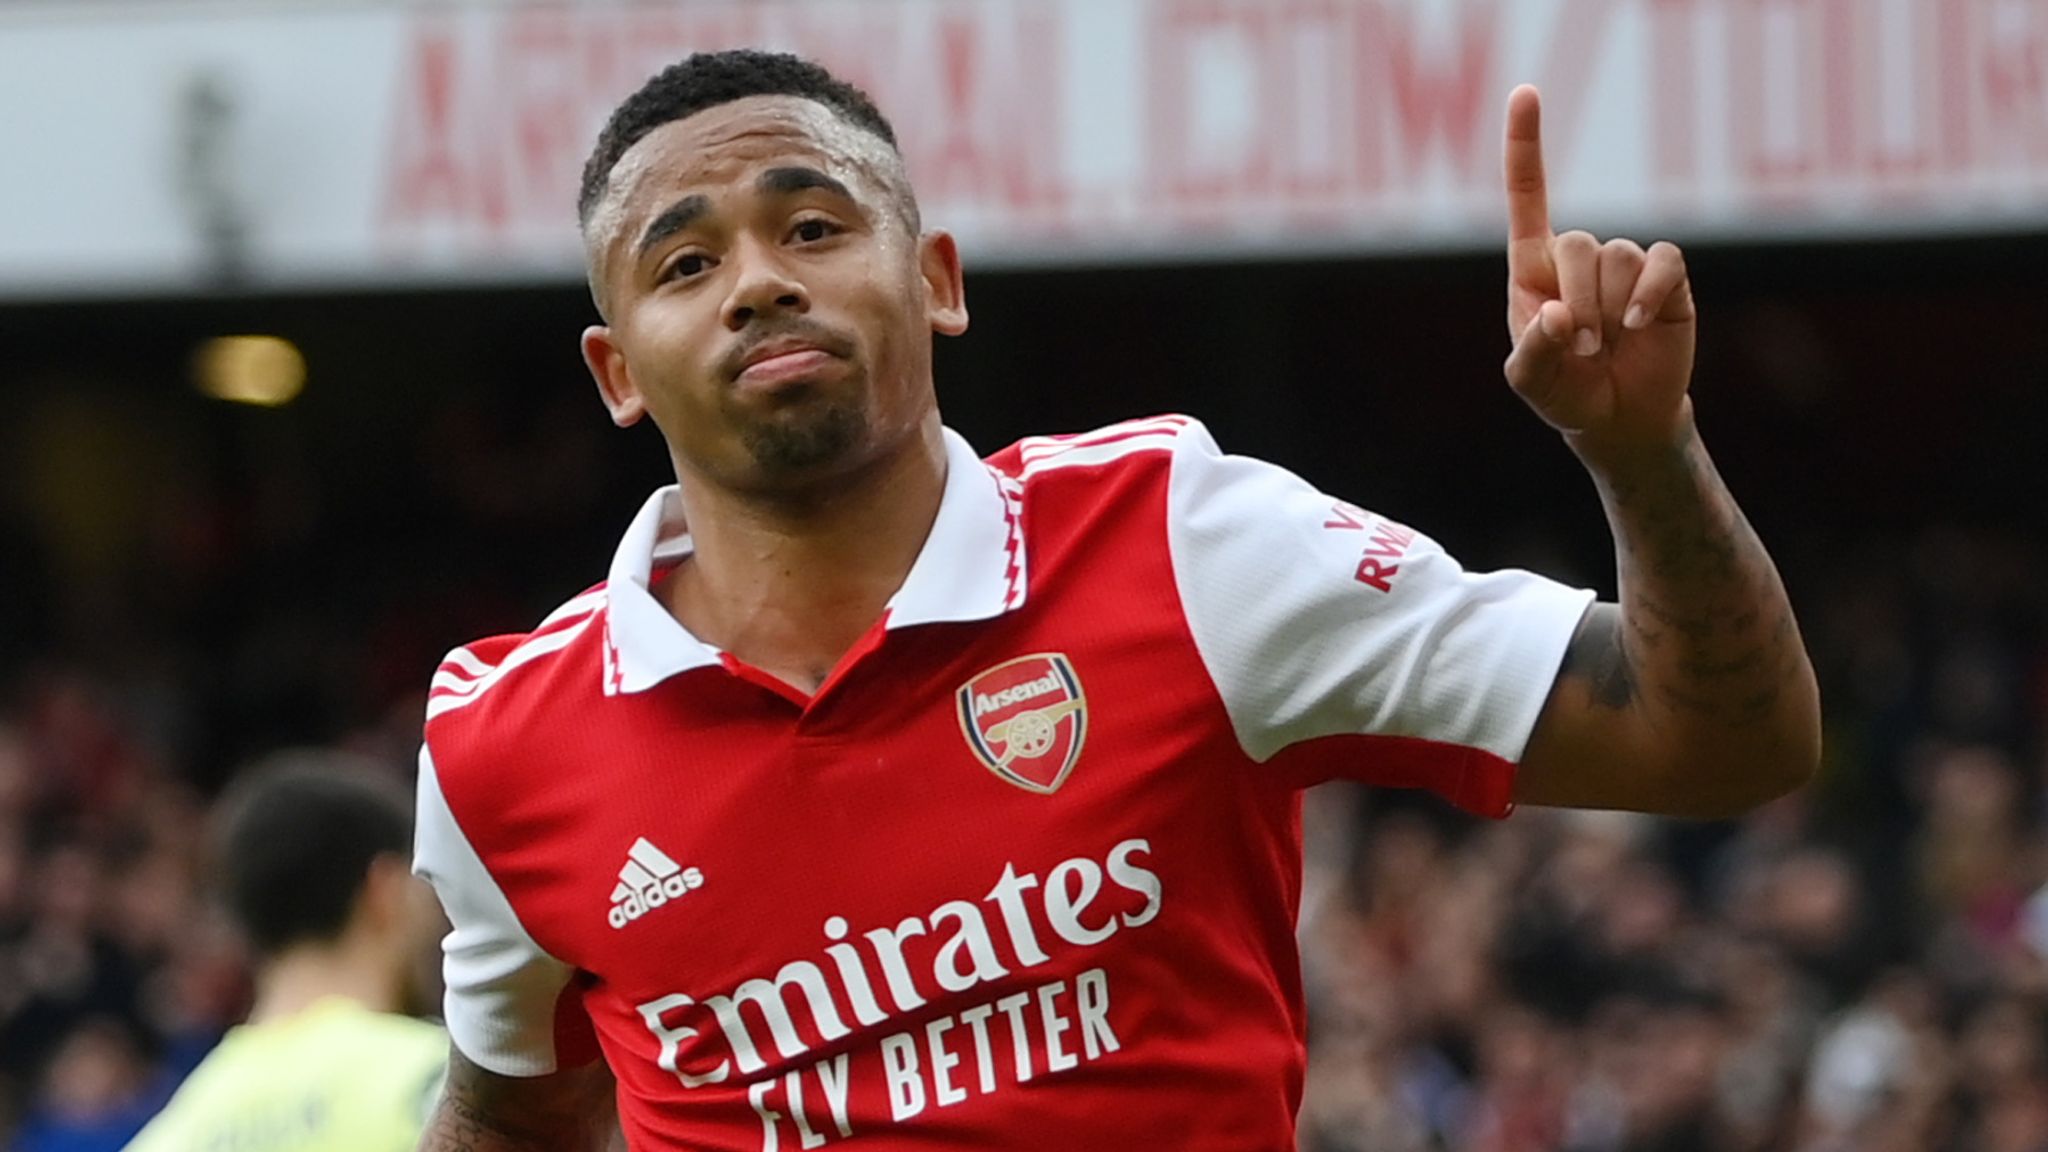 Arsenal 4-1 Leeds Gabriel Jesus scores twice as Gunners restore eight-point lead at top of Premier League Football News Sky Sports